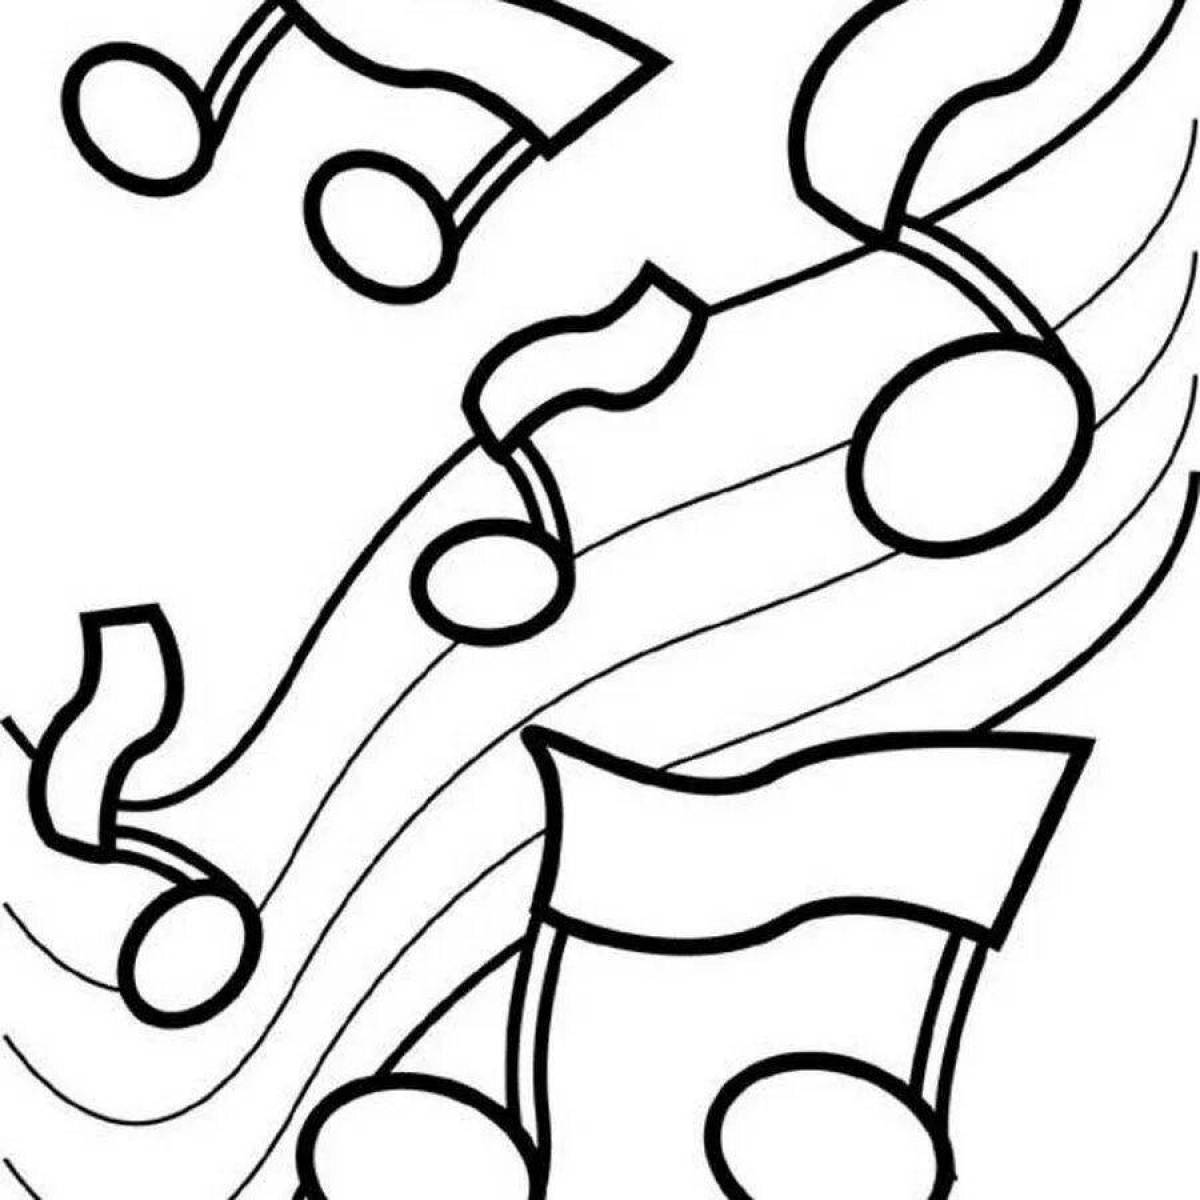 Playful musical note coloring page